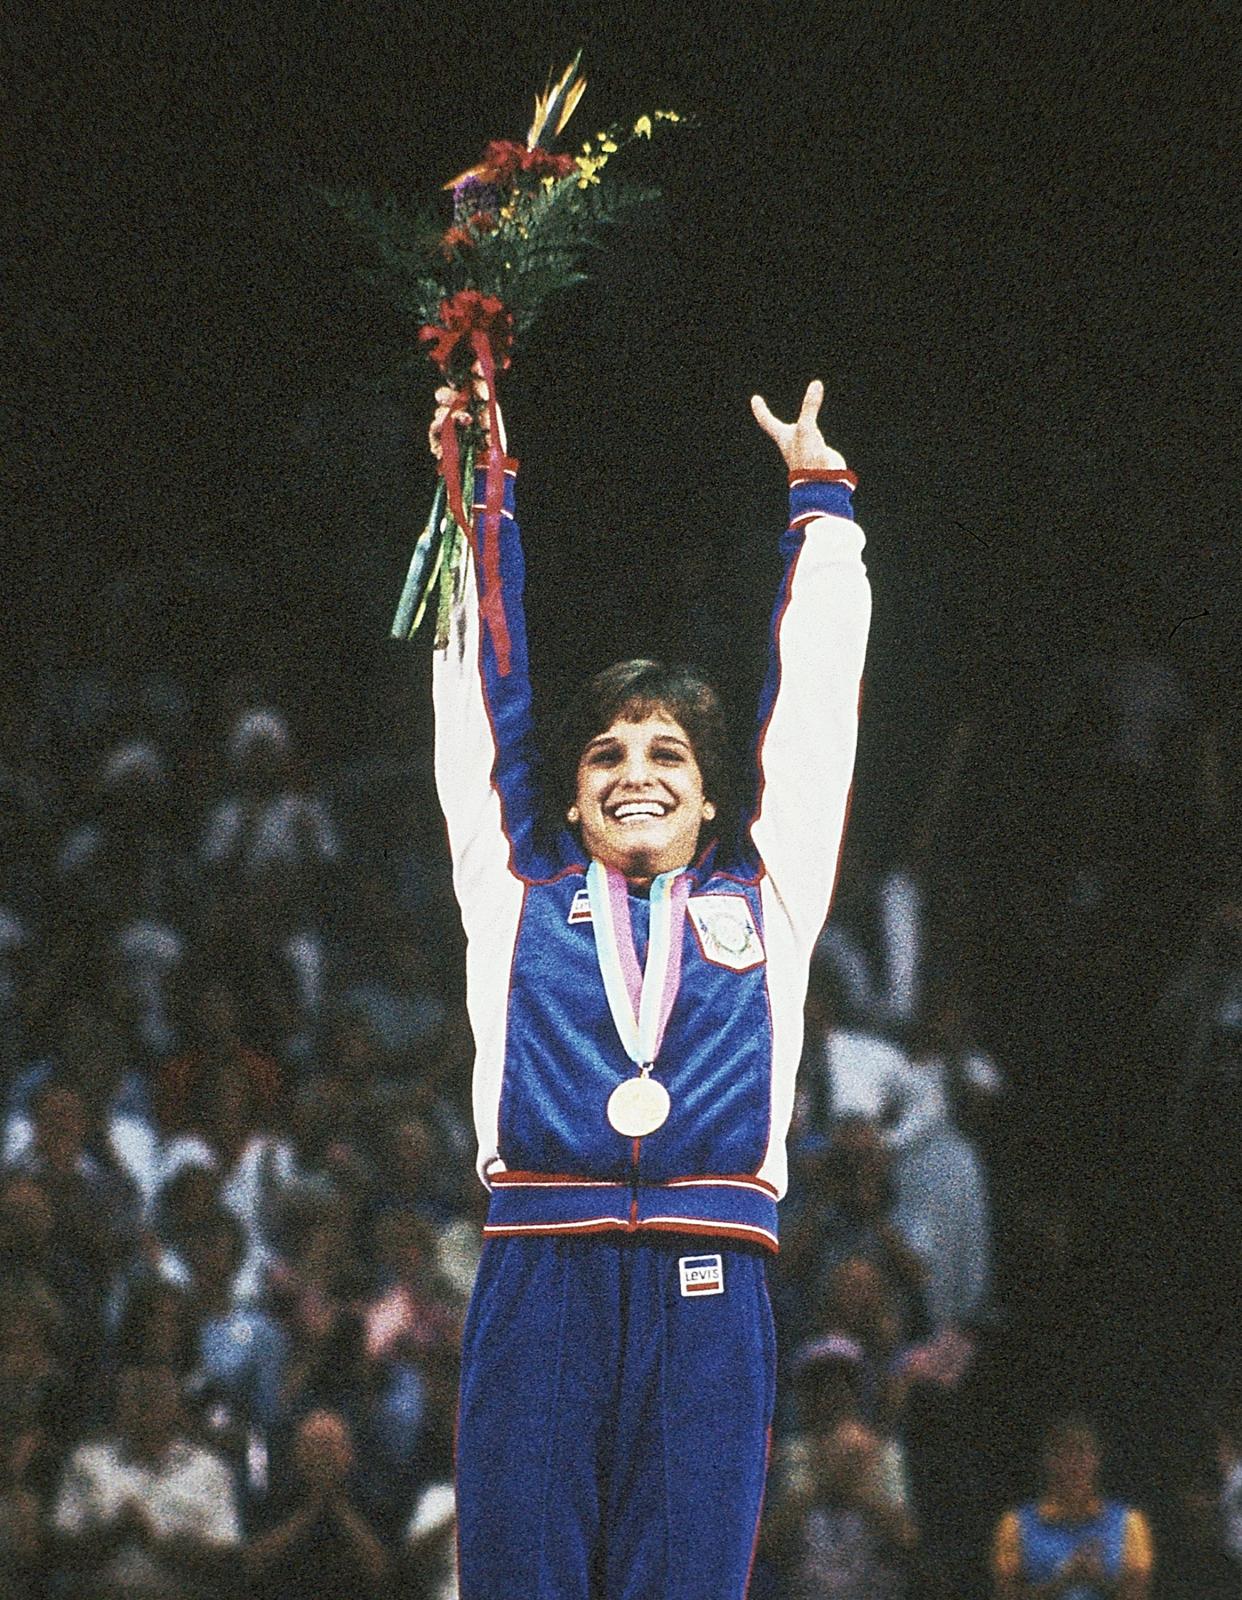 Mary Lou Retton celebrates after receiving the gold medal for winning the all-around competition at the 1984 Summer Olympics in Los Angeles.